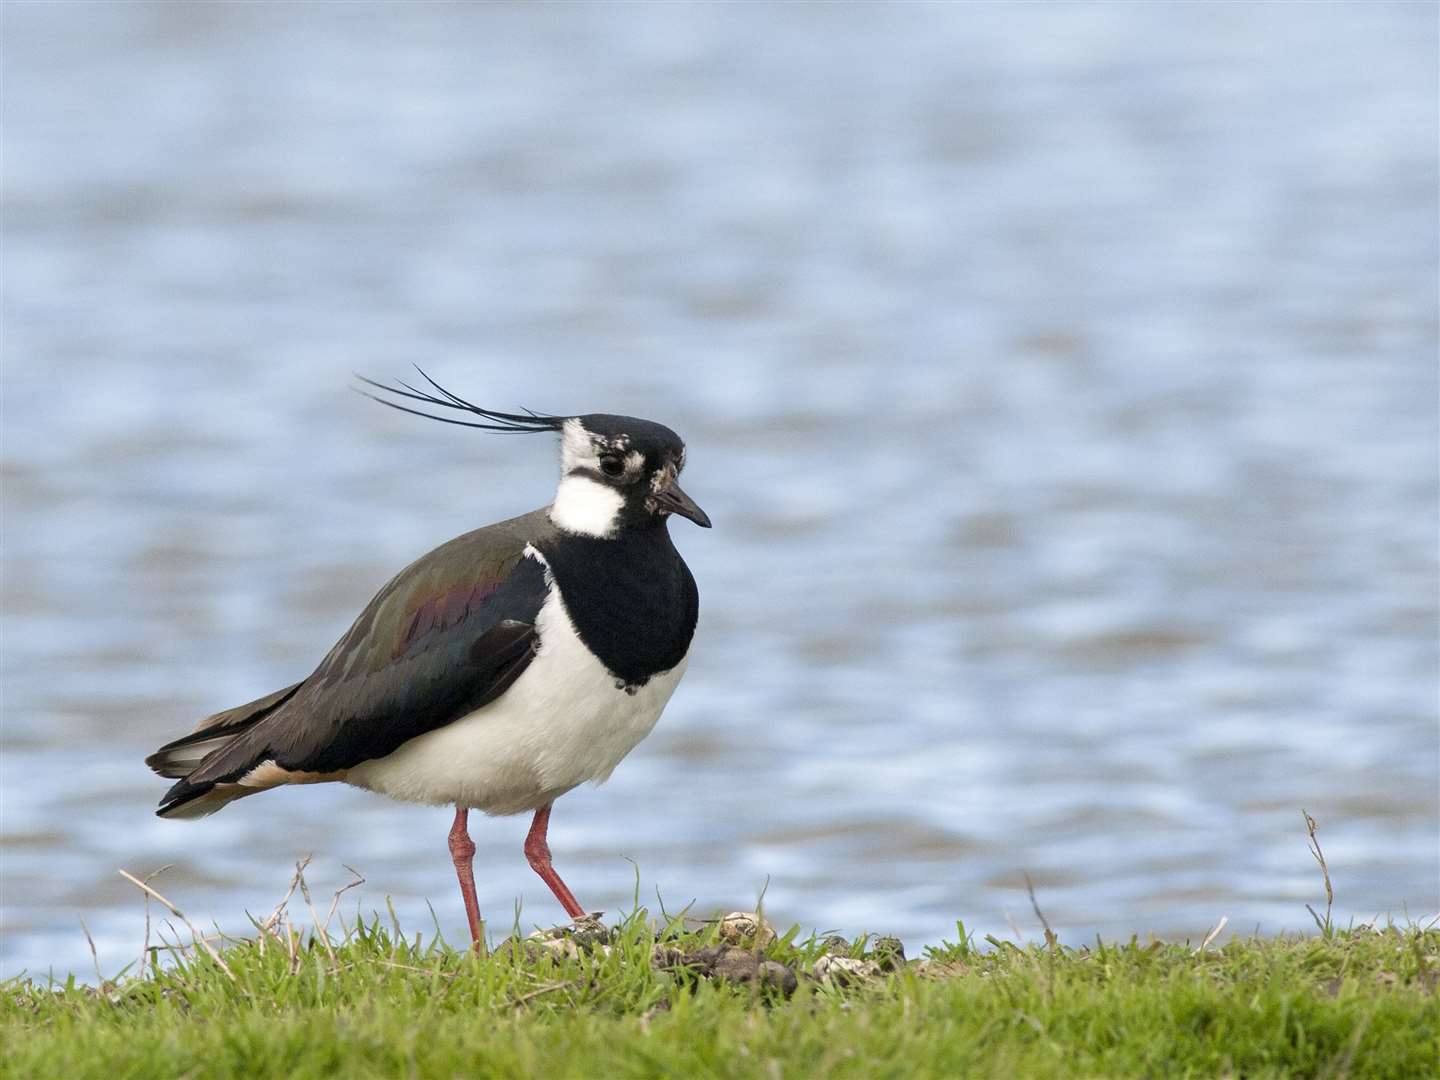 Our columnist's delight at seeing lapwings nesting quickly turned to despair.